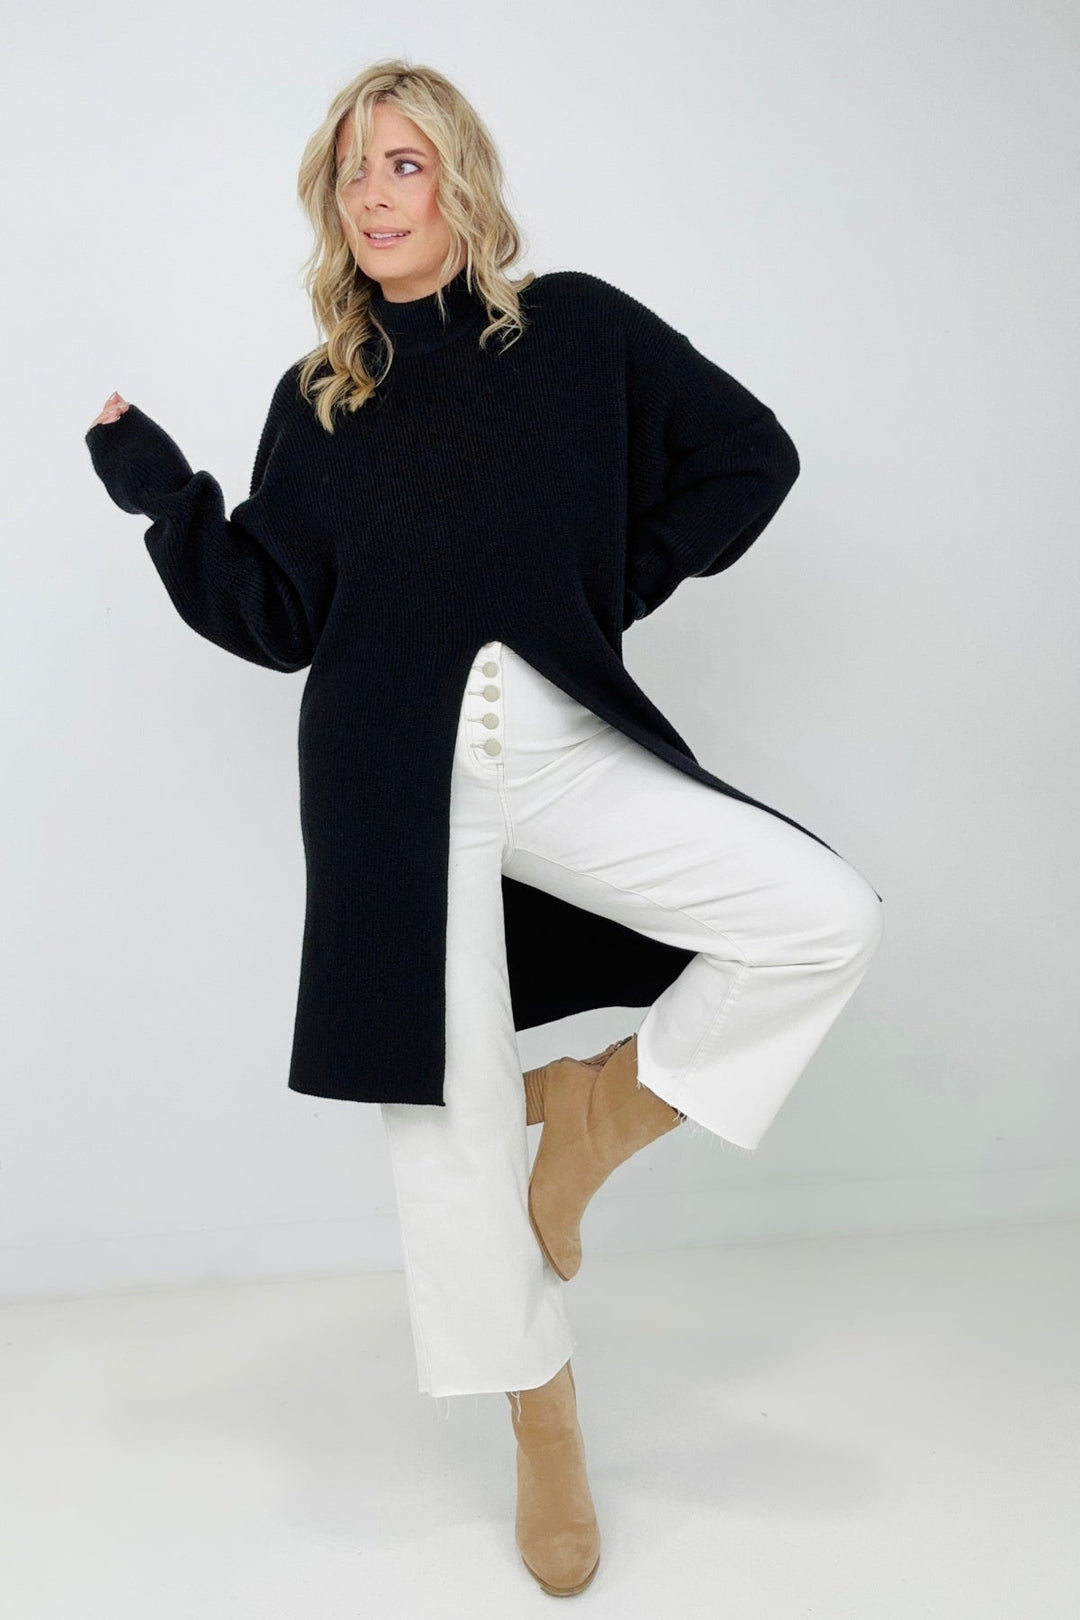 Front Slit Sweaters: A Versatile and Stylish Addition to Your Wardrobe